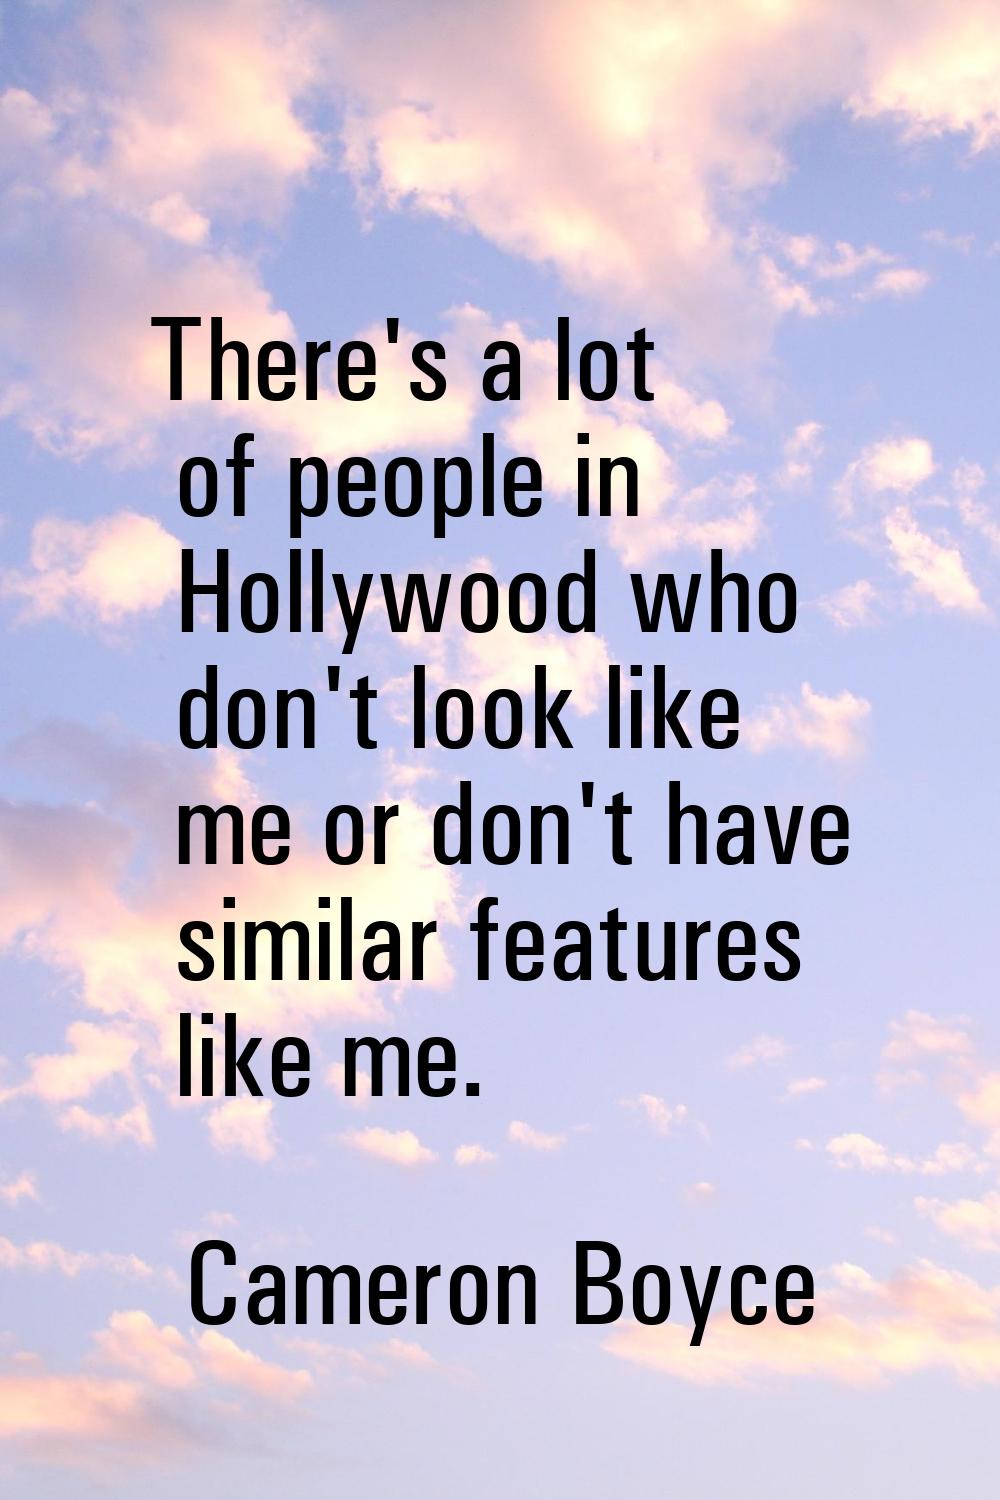 There's a lot of people in Hollywood who don't look like me or don't have similar features like me.